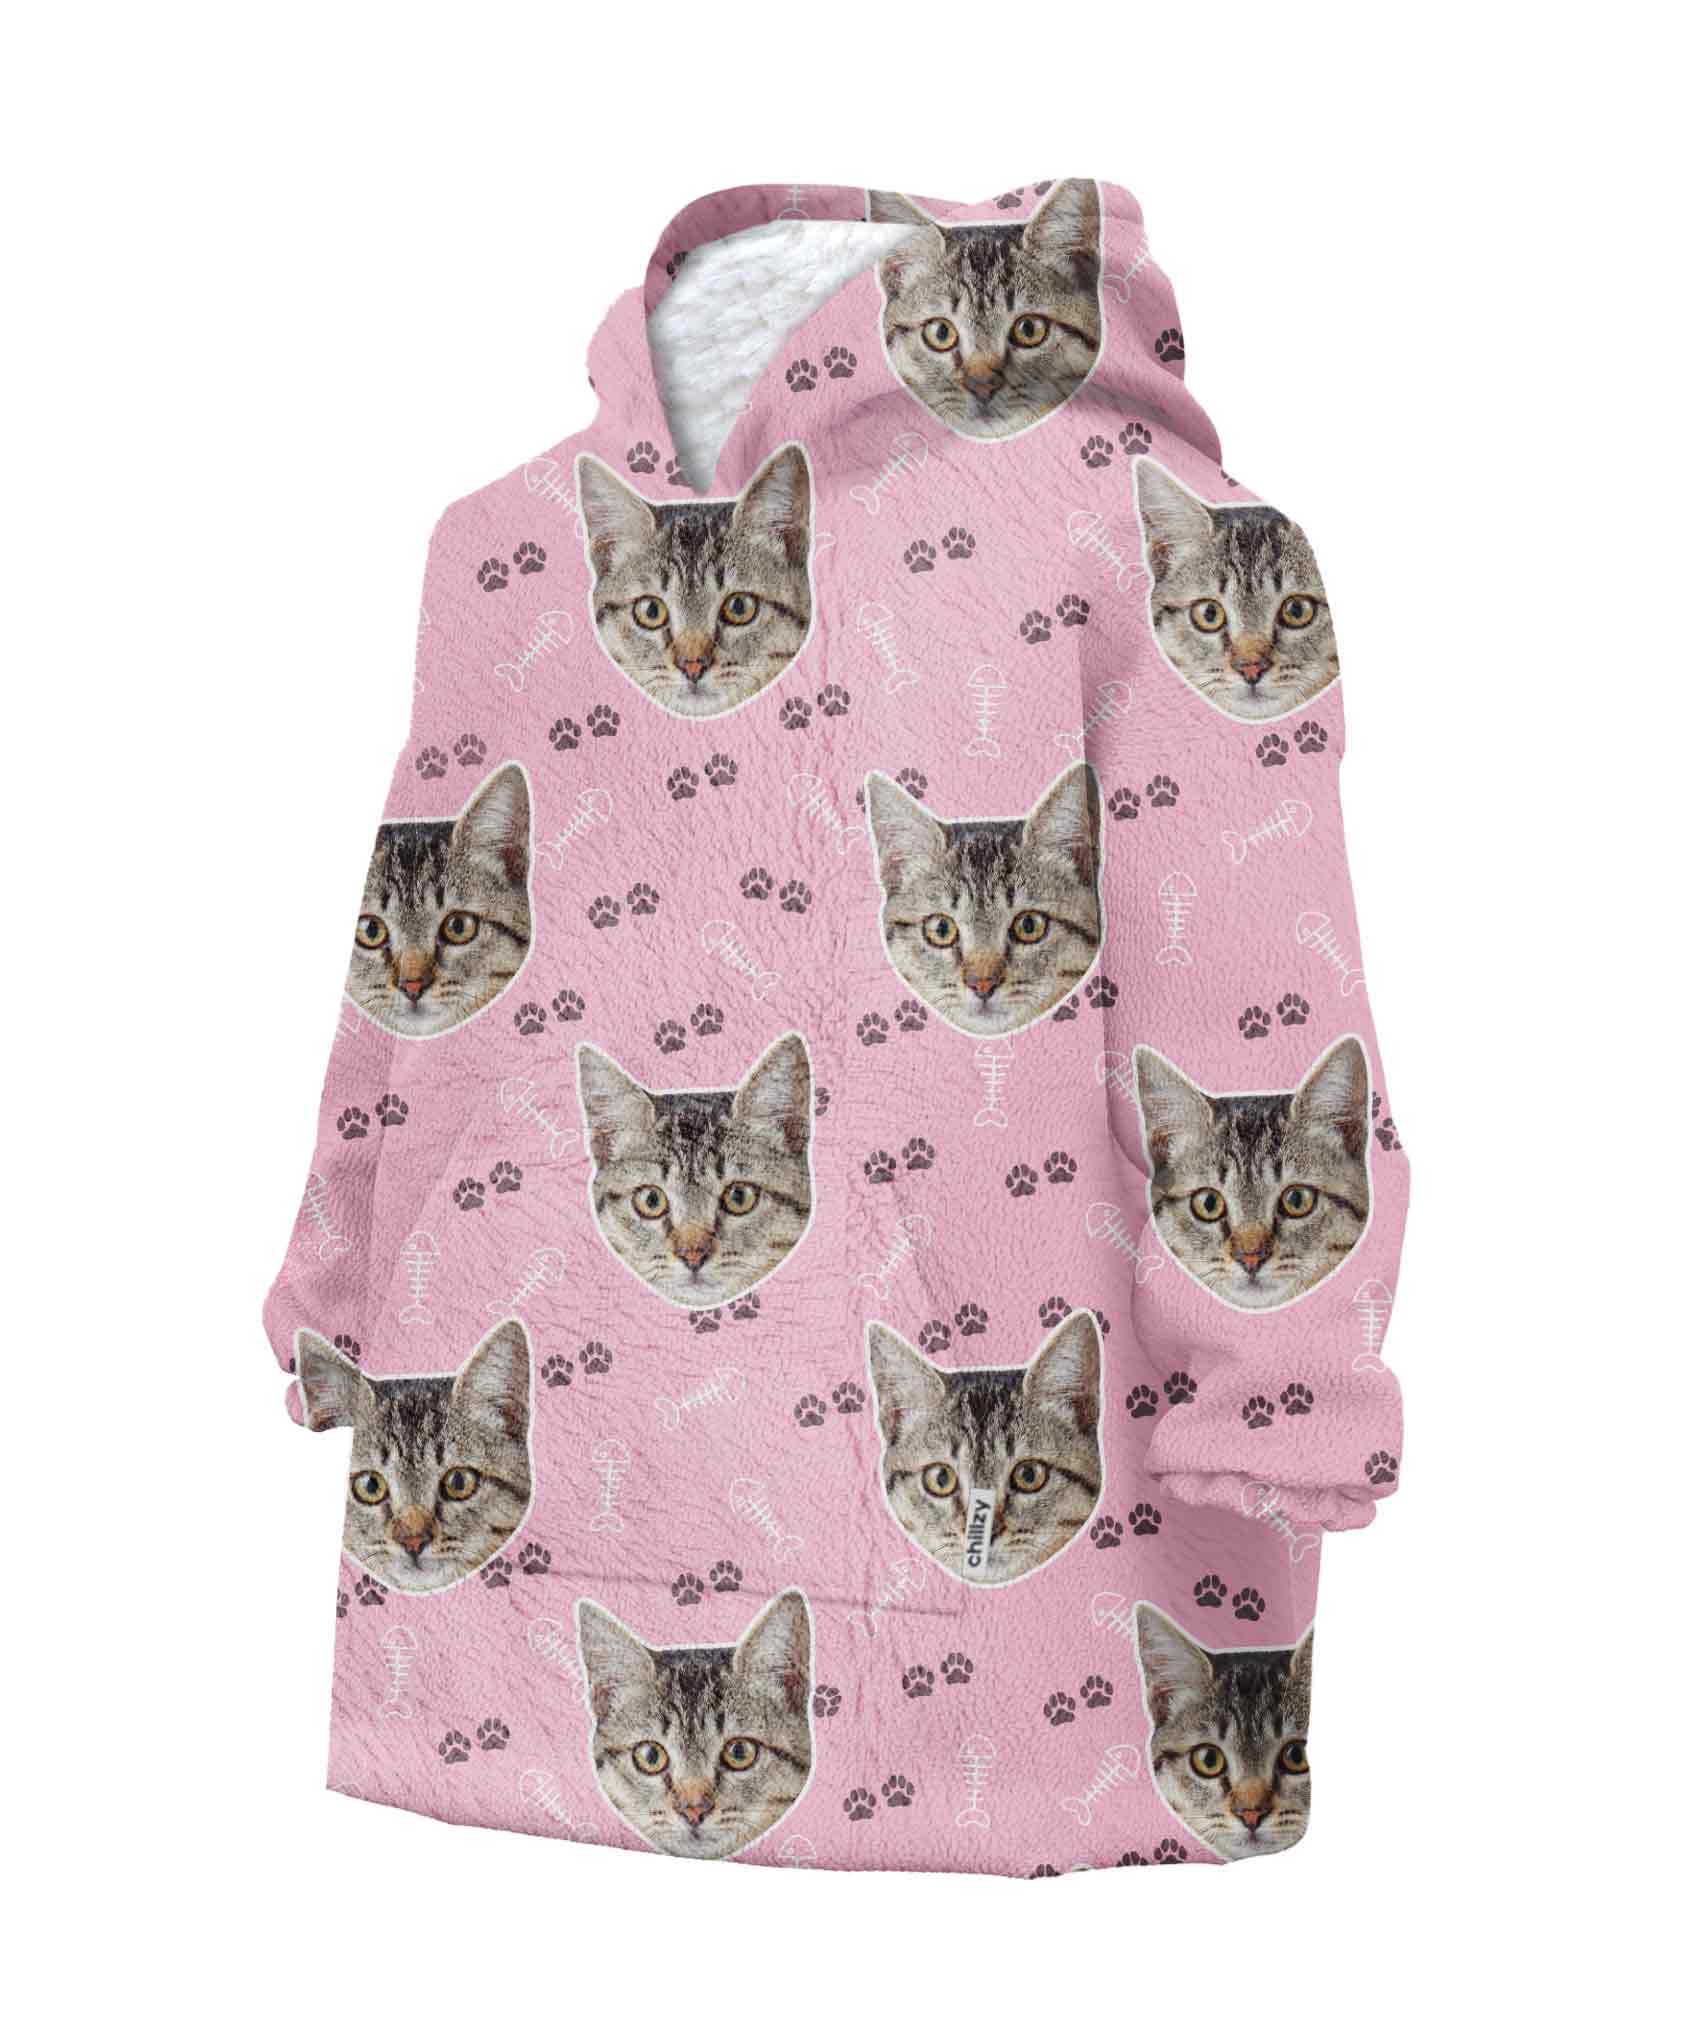 Your Cat Chillzy Kids Hoodie Blanket